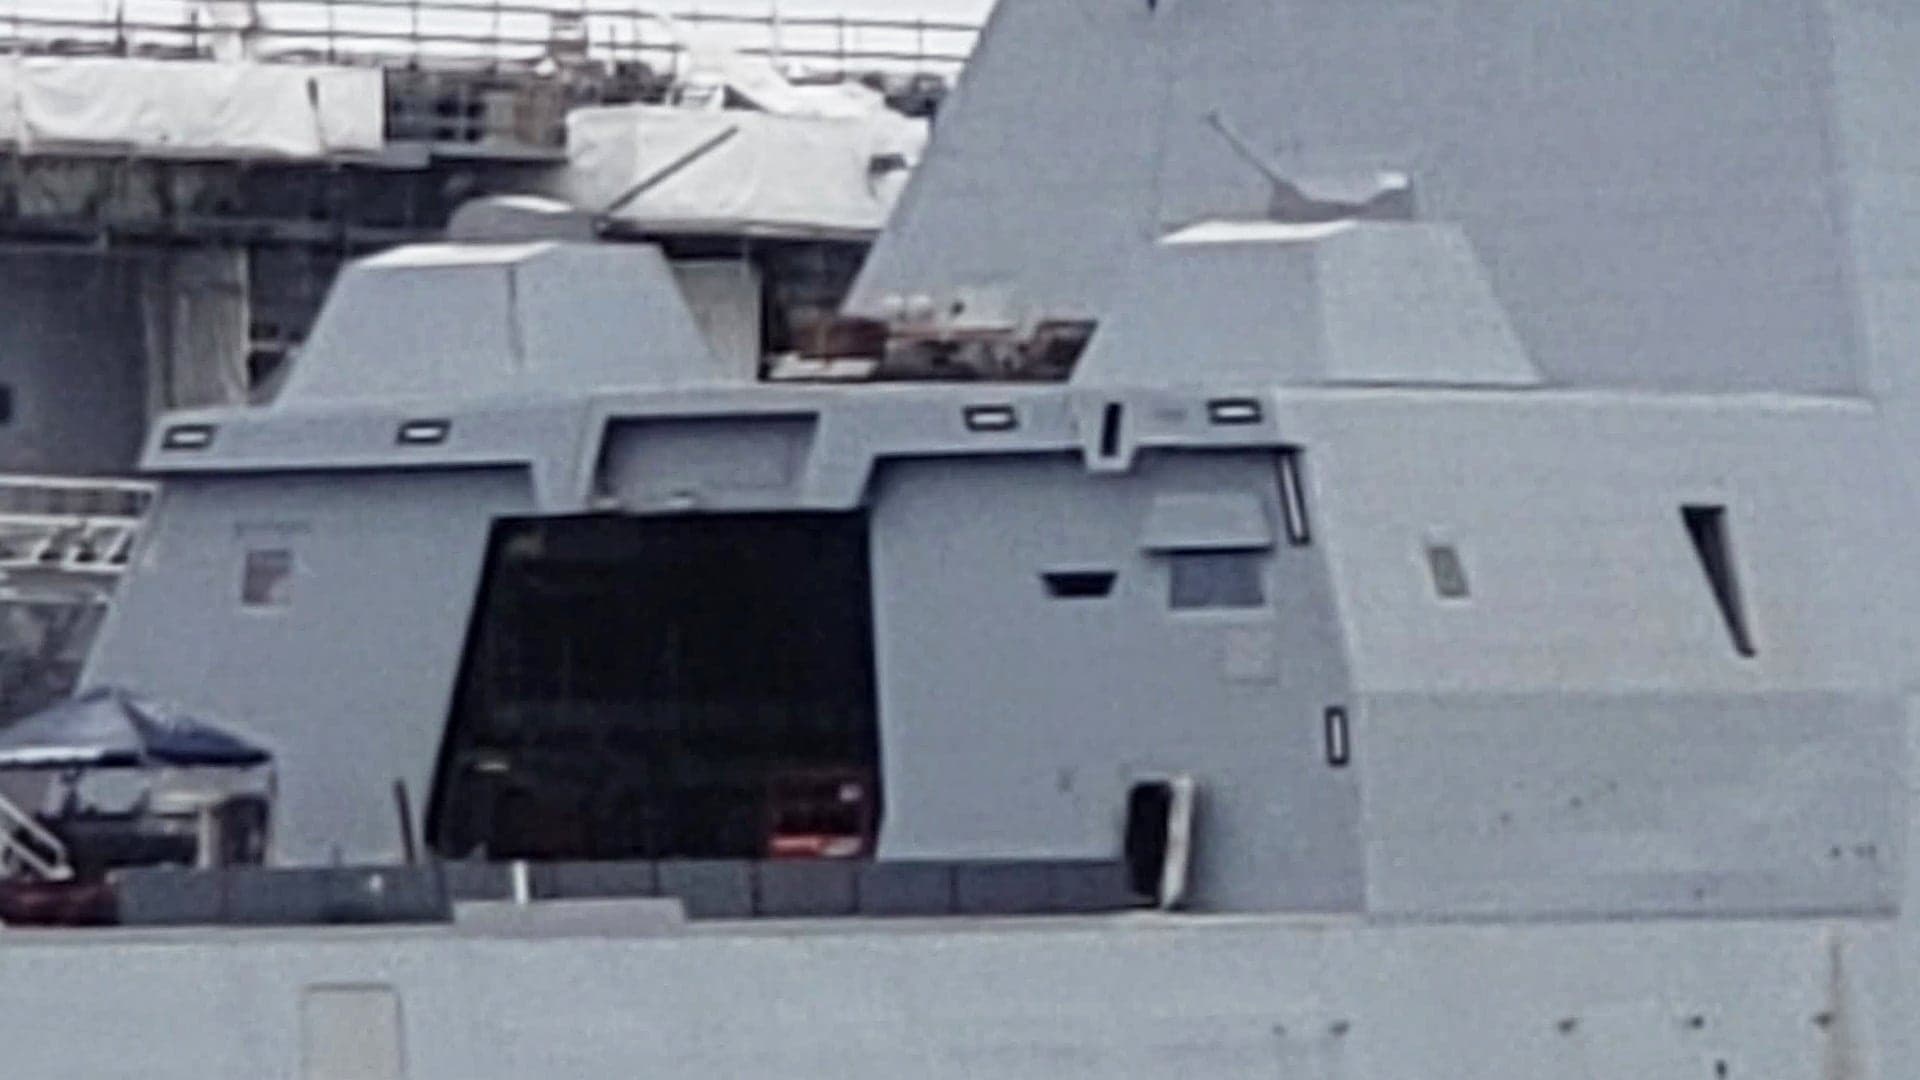 Navy’s First Stealthy Zumwalt Class Destroyer Photographed With 30mm Guns Fitted